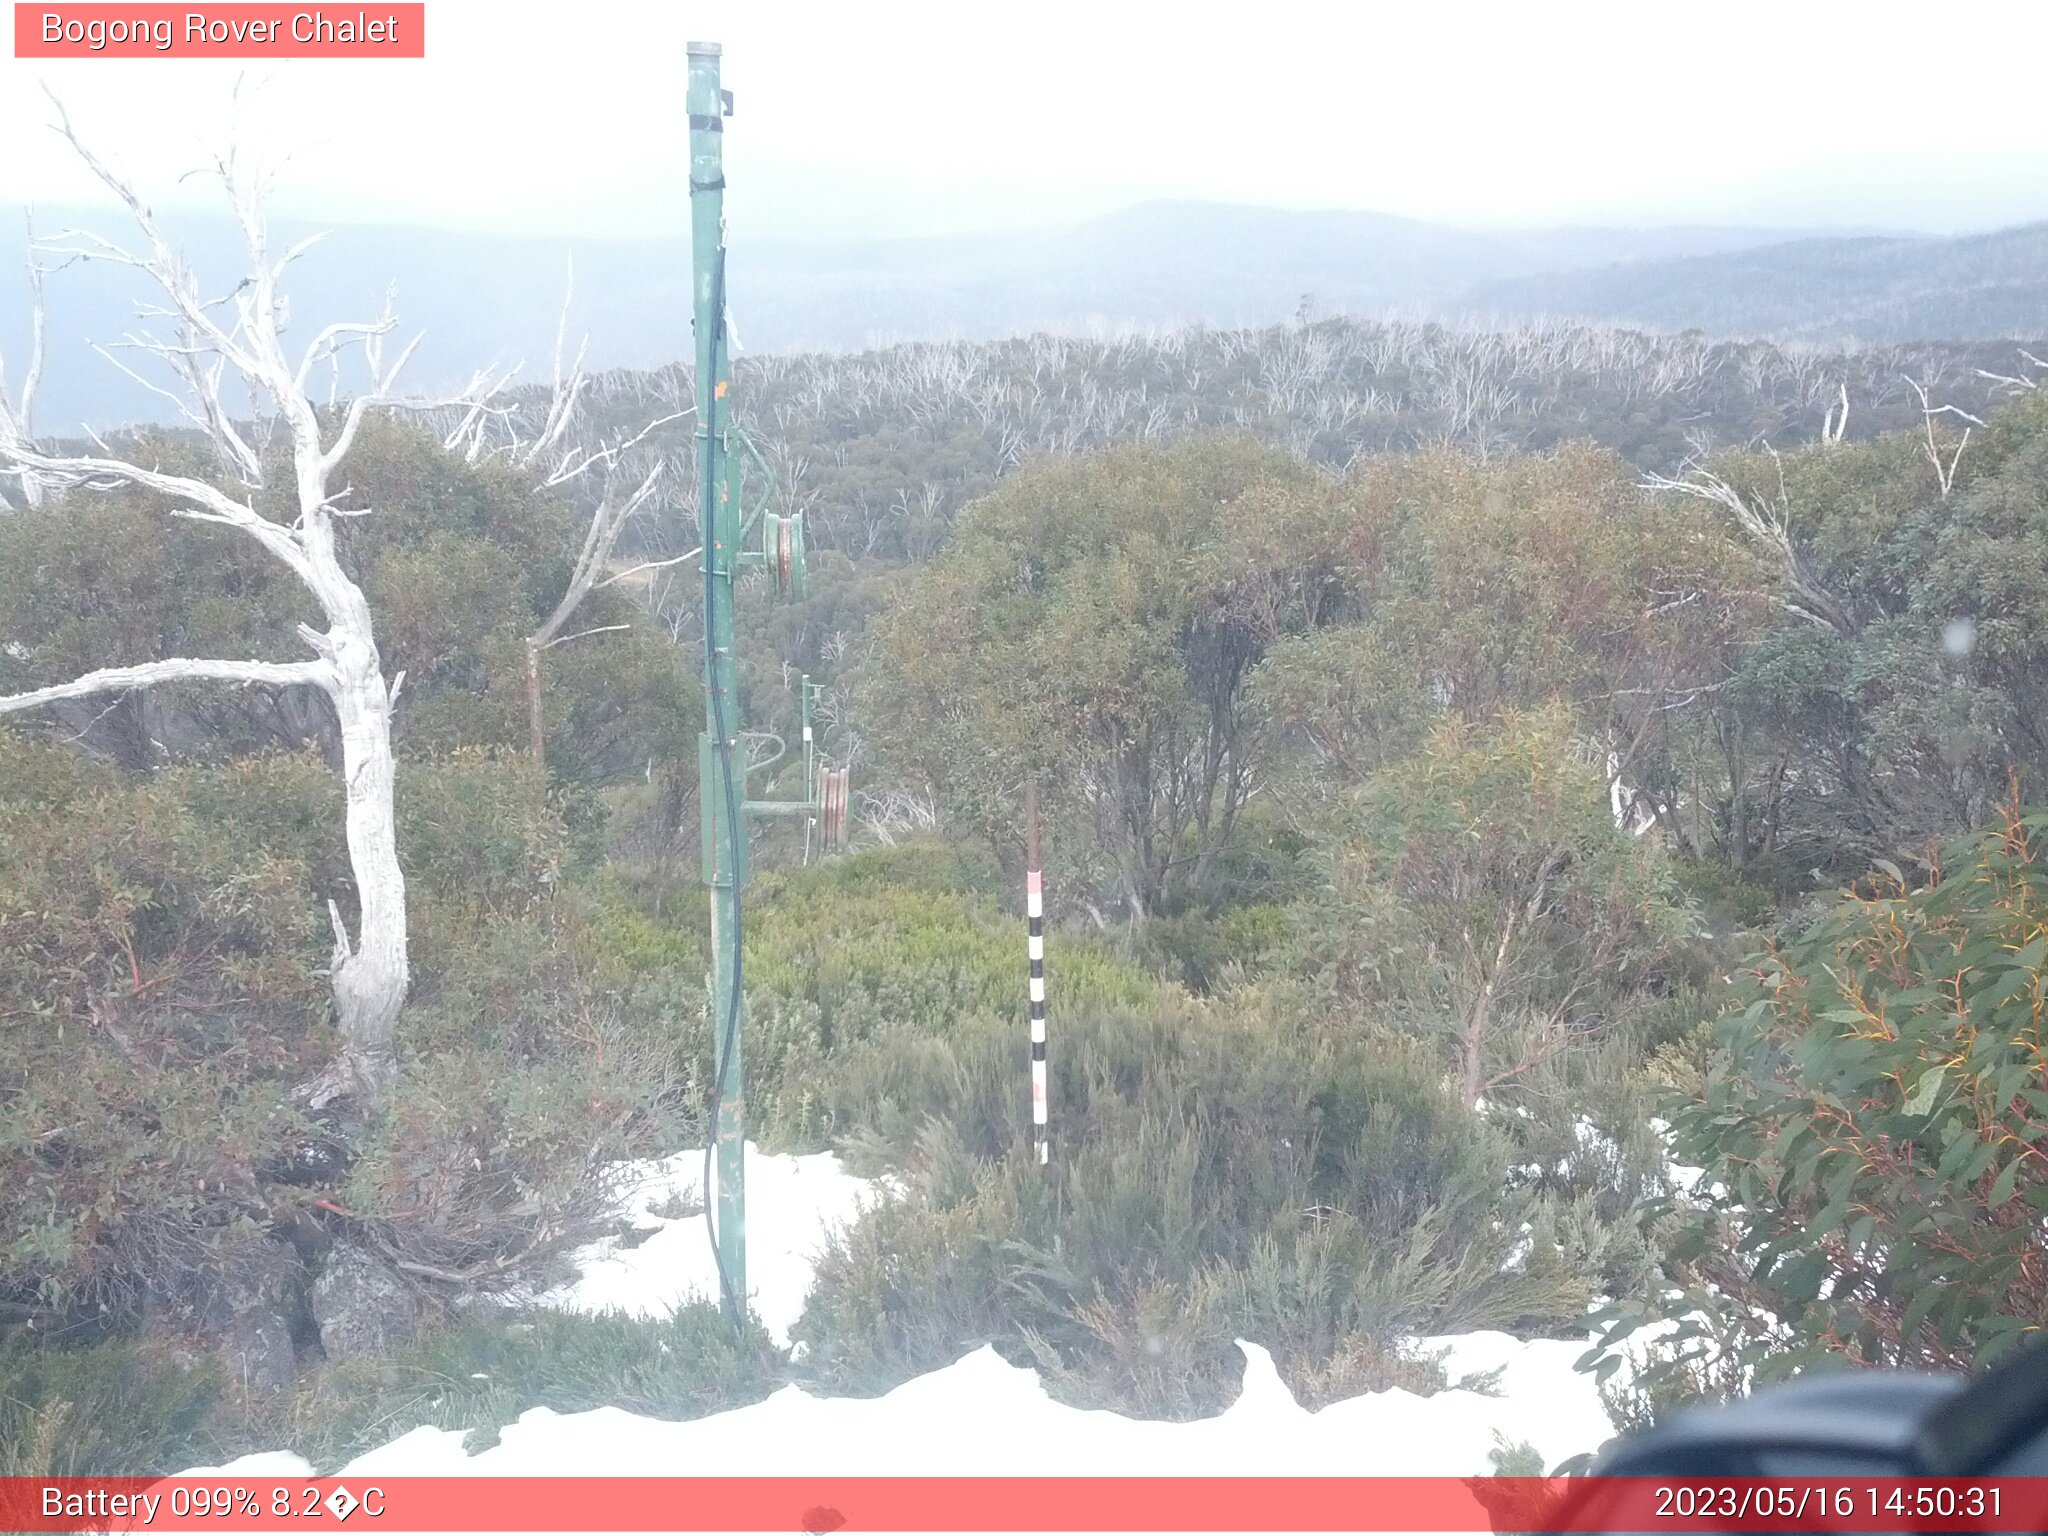 Bogong Web Cam 2:50pm Tuesday 16th of May 2023